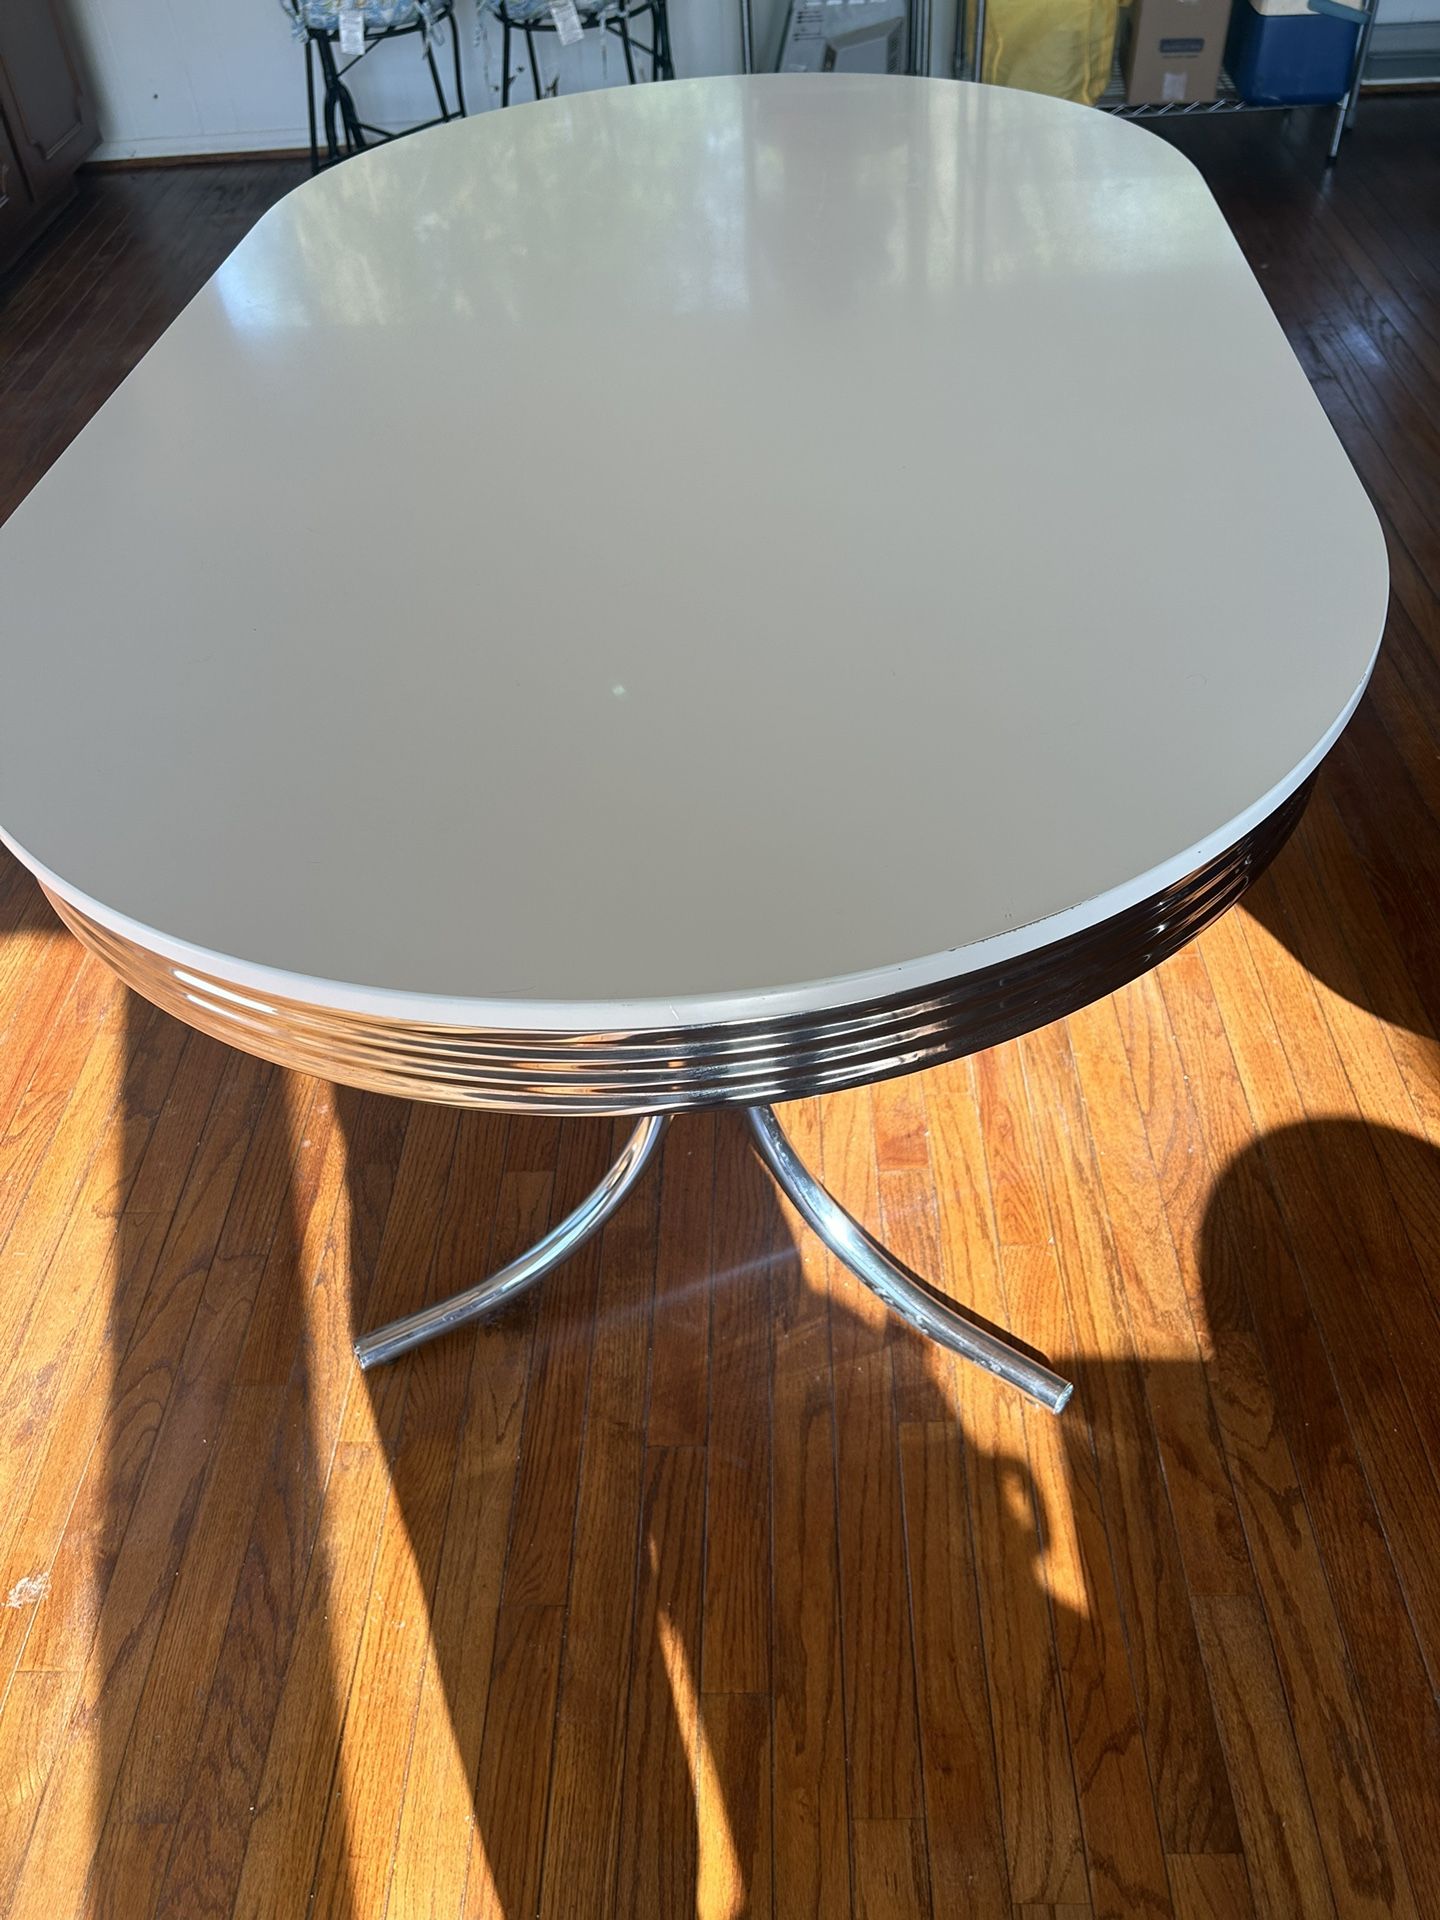 Nice White Formica Top Table With Chrome Legs